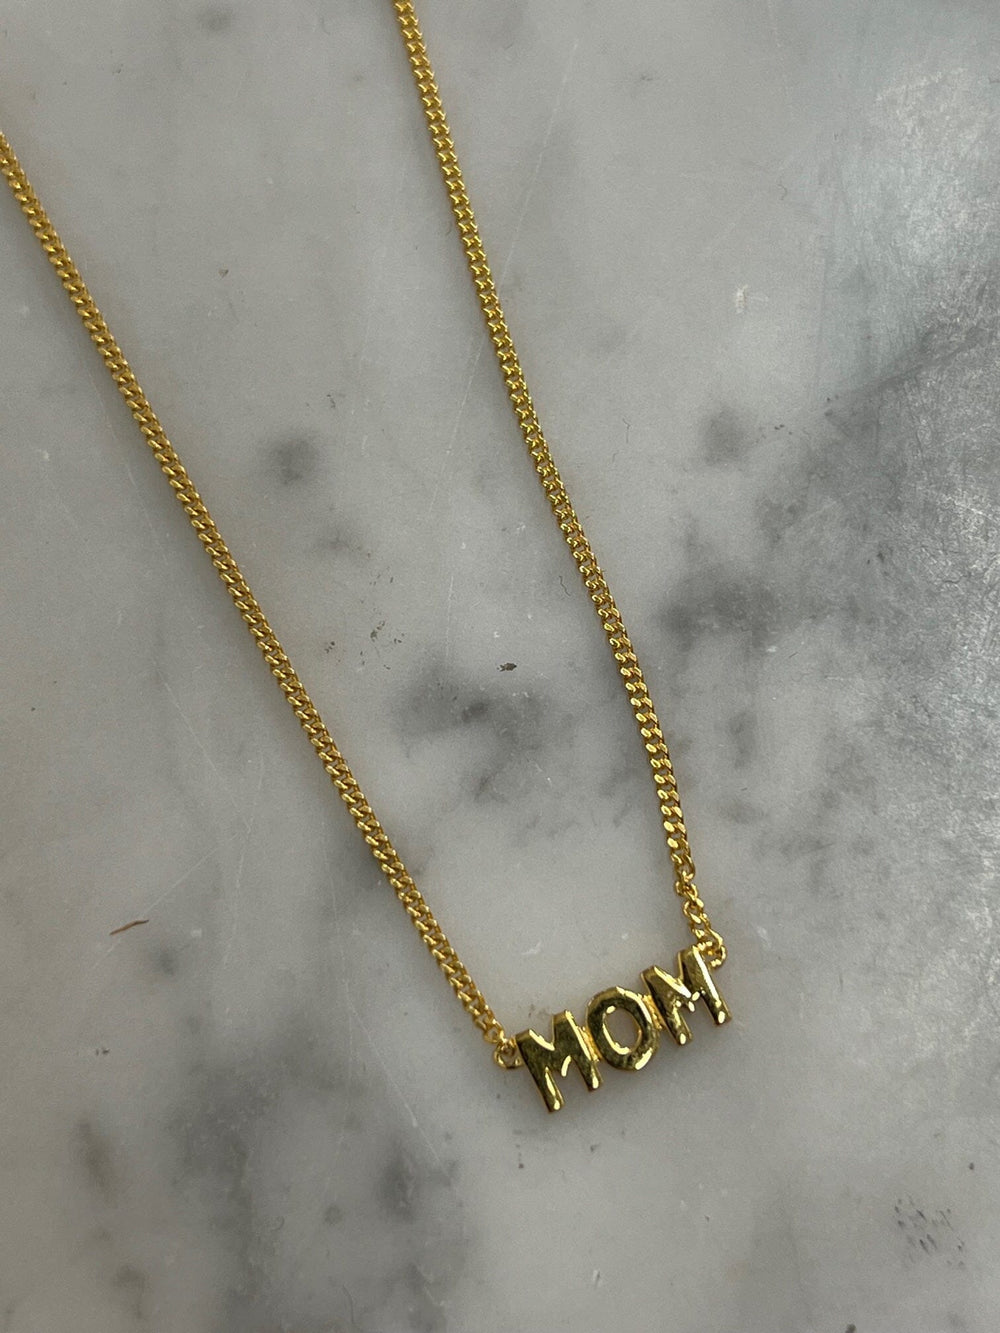 MOM NECKLACE 43 CM IN GOLD NECKLACE MARIA BLACK 